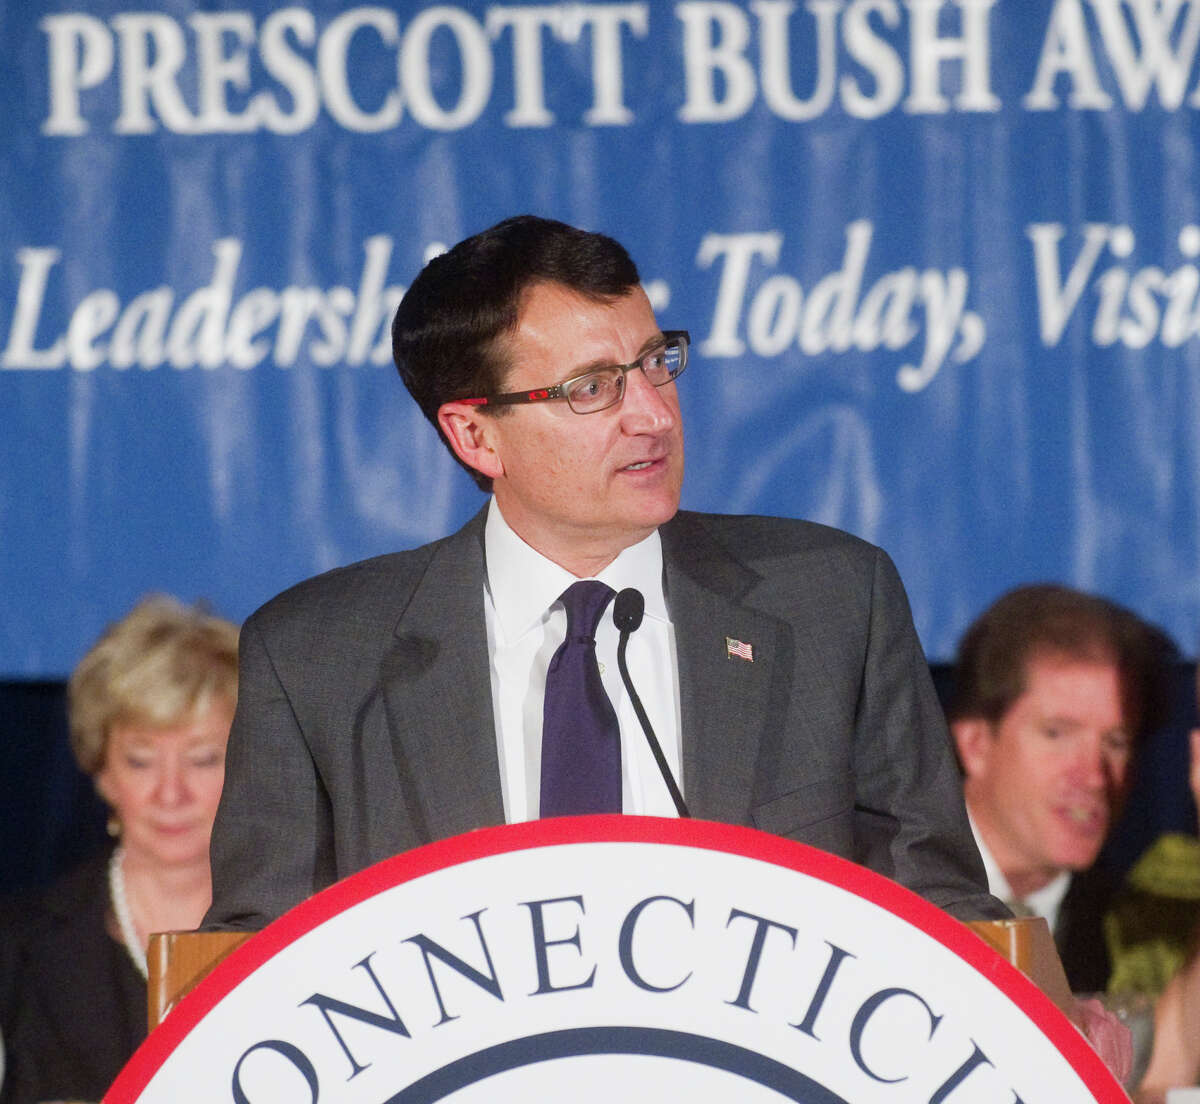 Jerry Labriola, Jr., Chairman of the Connecticut Republicans, introduces Ann Romney, wife of presumptive GOP presidential nominee Mitt Romney, during the Prescott Bush Award dinner at the Stamford Marriott Hotel & Spa in Stamford, Conn., April 23, 2012. The event is the biggest fundraiser of the year for the state GOP. Former Republican gubernatorial candidate Tom Foley of Greenwich received the the Bush award and state Rep. Lile Gibbons, R-150th District, also received an award during the ceremony.